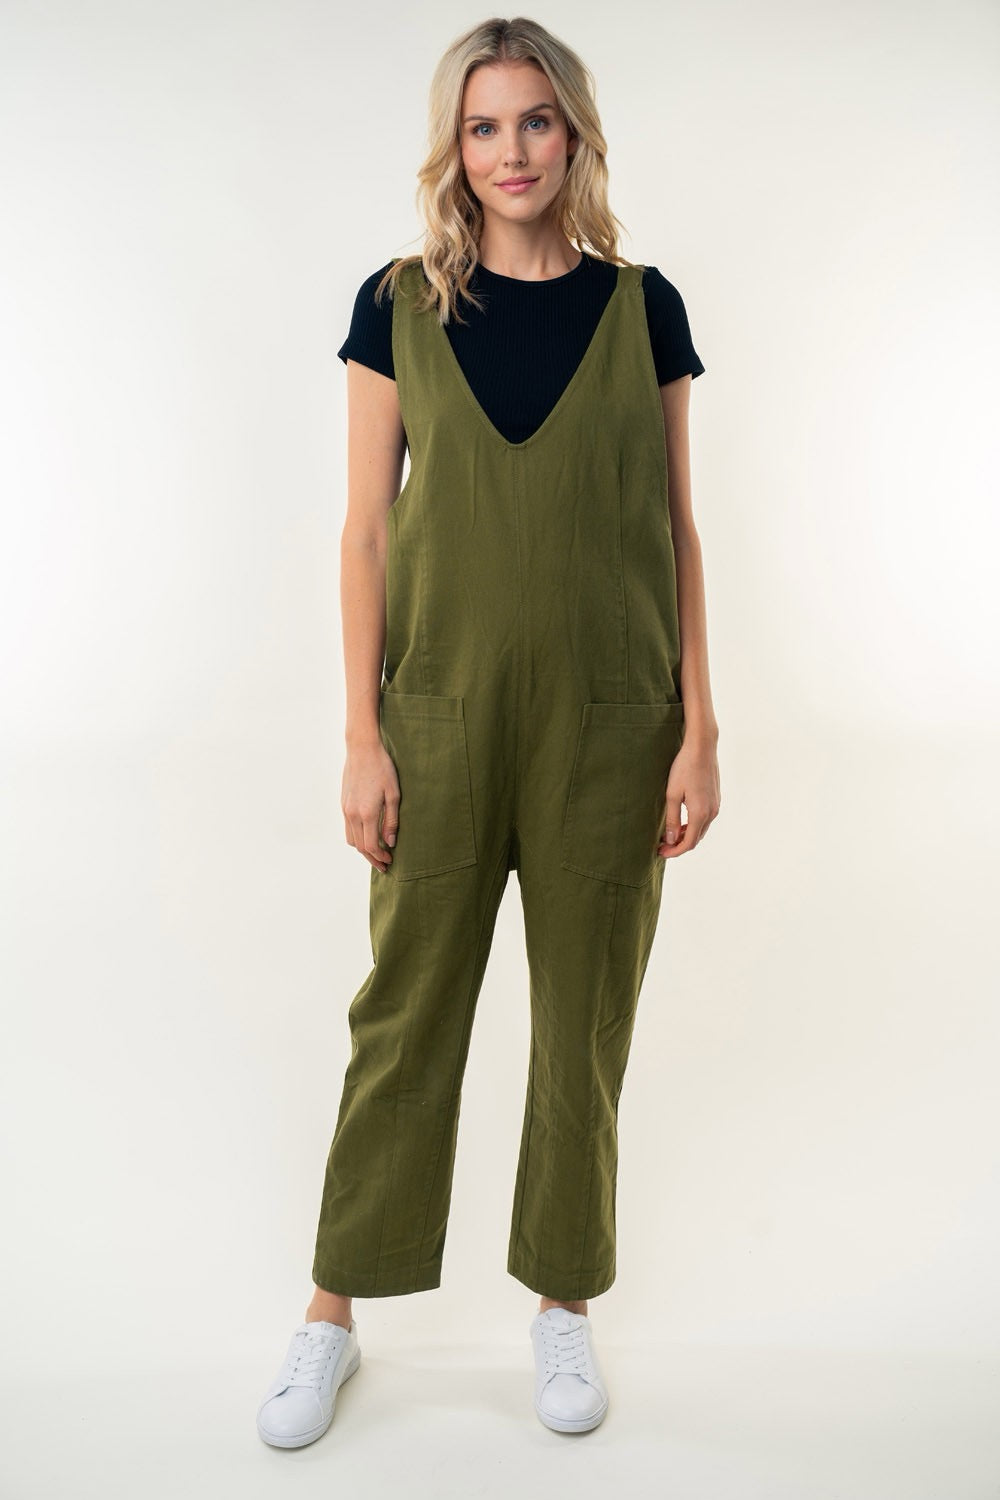 Curvy White Birch - Sleeveless Solid Knit Olive Jumpsuit